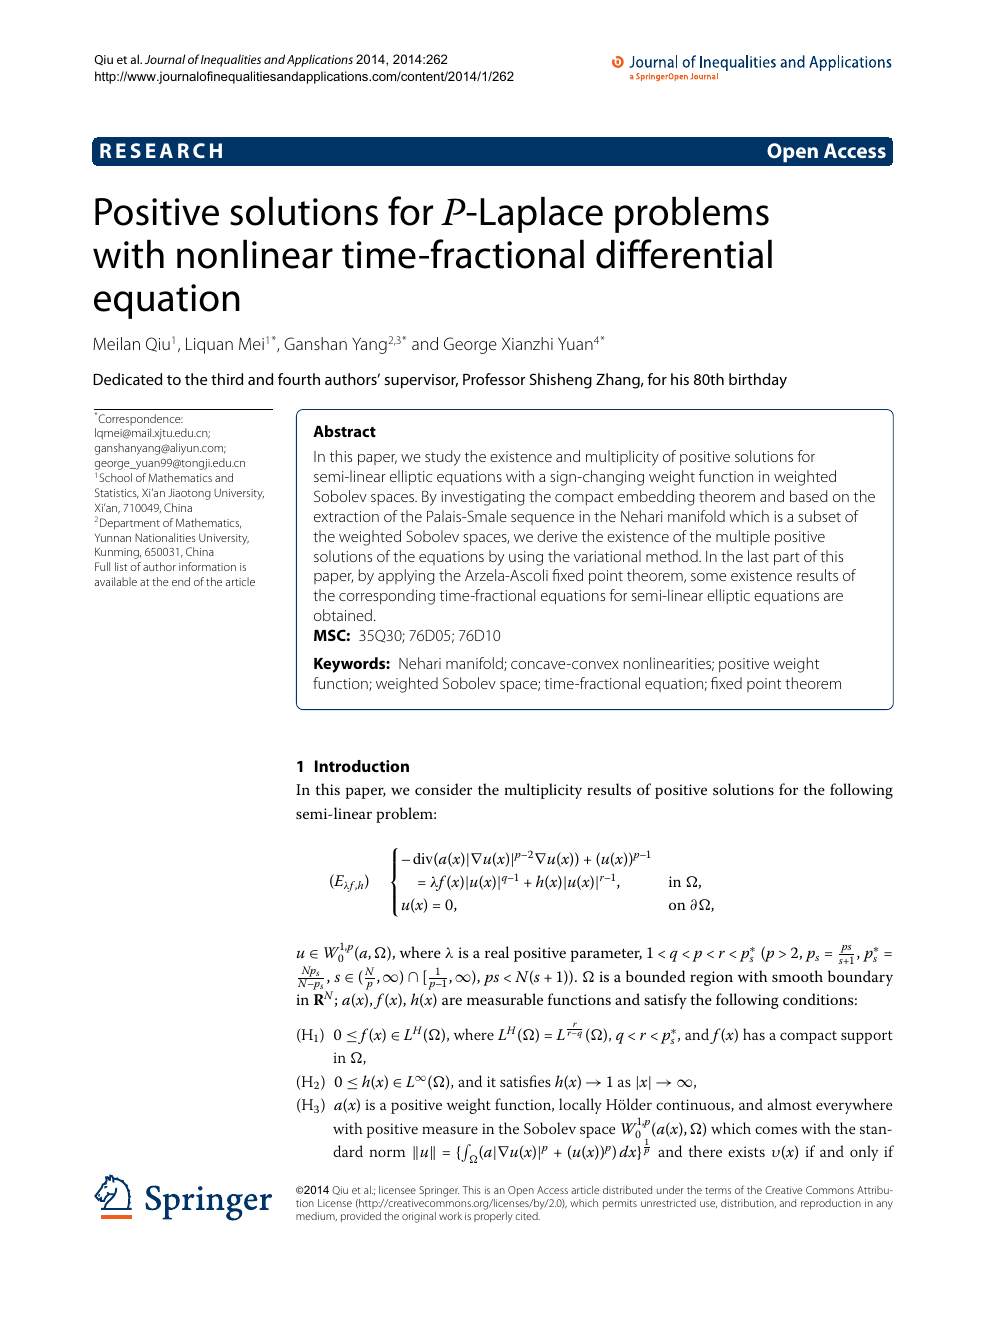 Positive Solutions For P Laplace Problems With Nonlinear Time Fractional Differential Equation Topic Of Research Paper In Mathematics Download Scholarly Article Pdf And Read For Free On Cyberleninka Open Science Hub